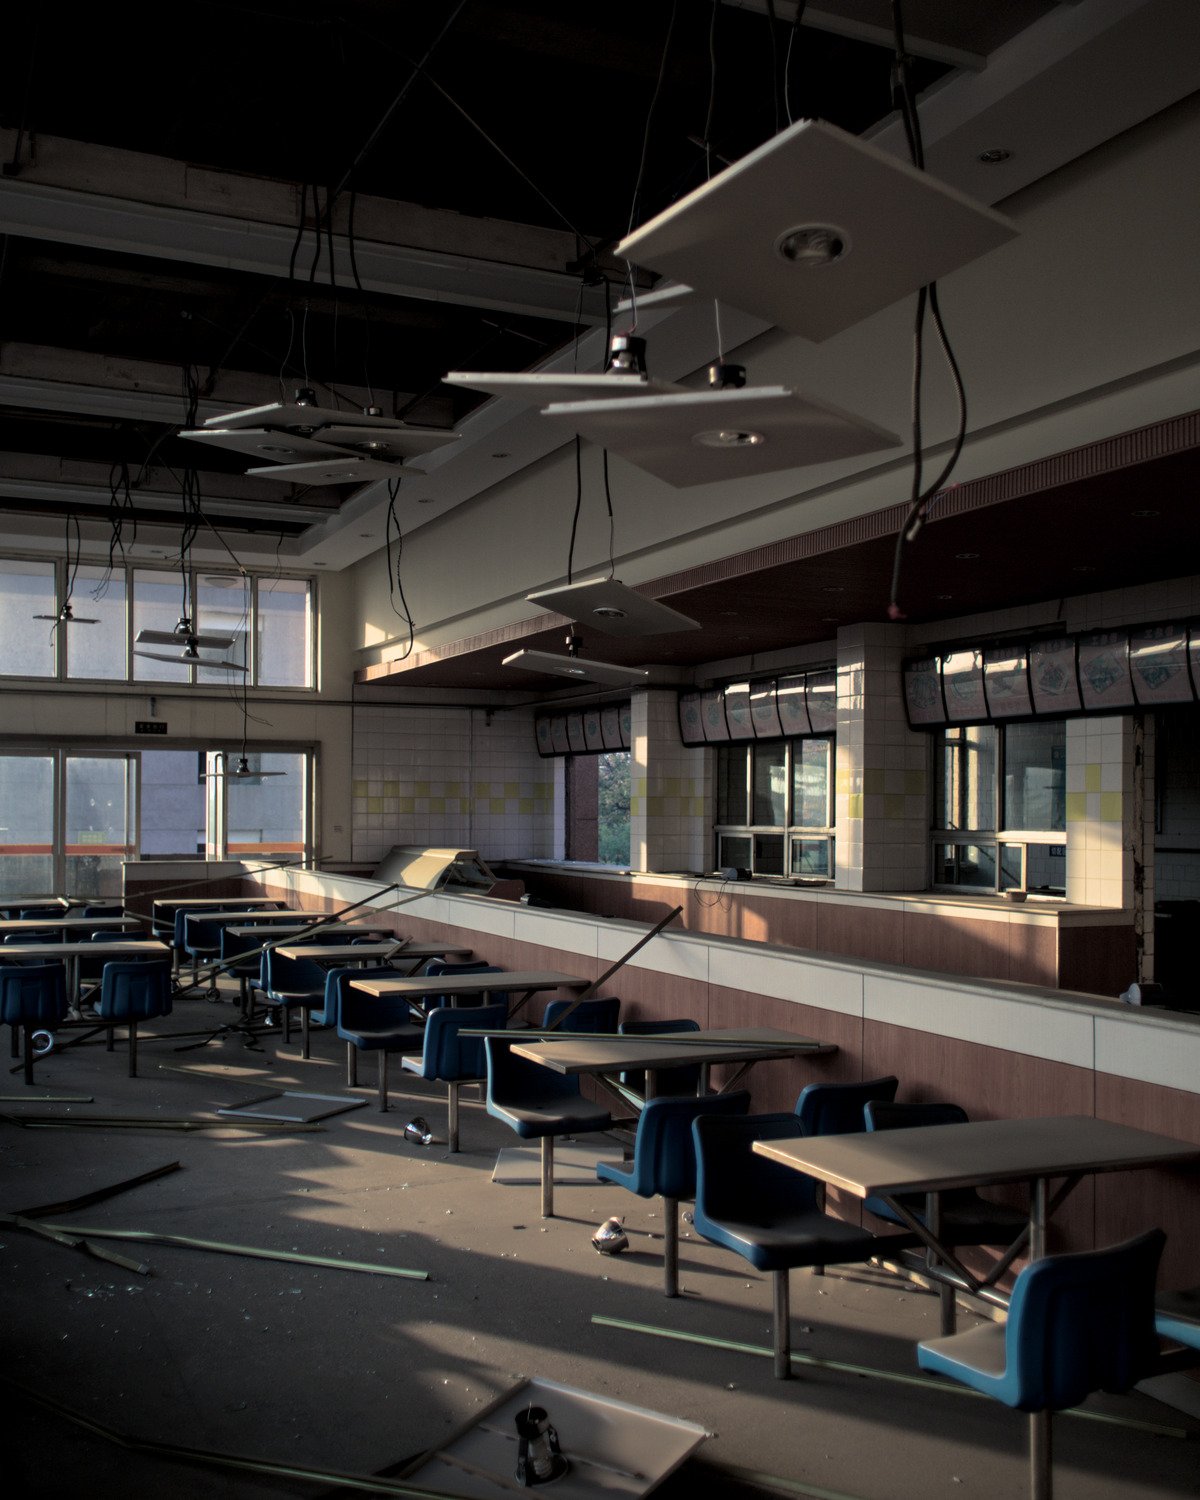 resized_JN Iron and Steel Cafeteria [46479].jpg